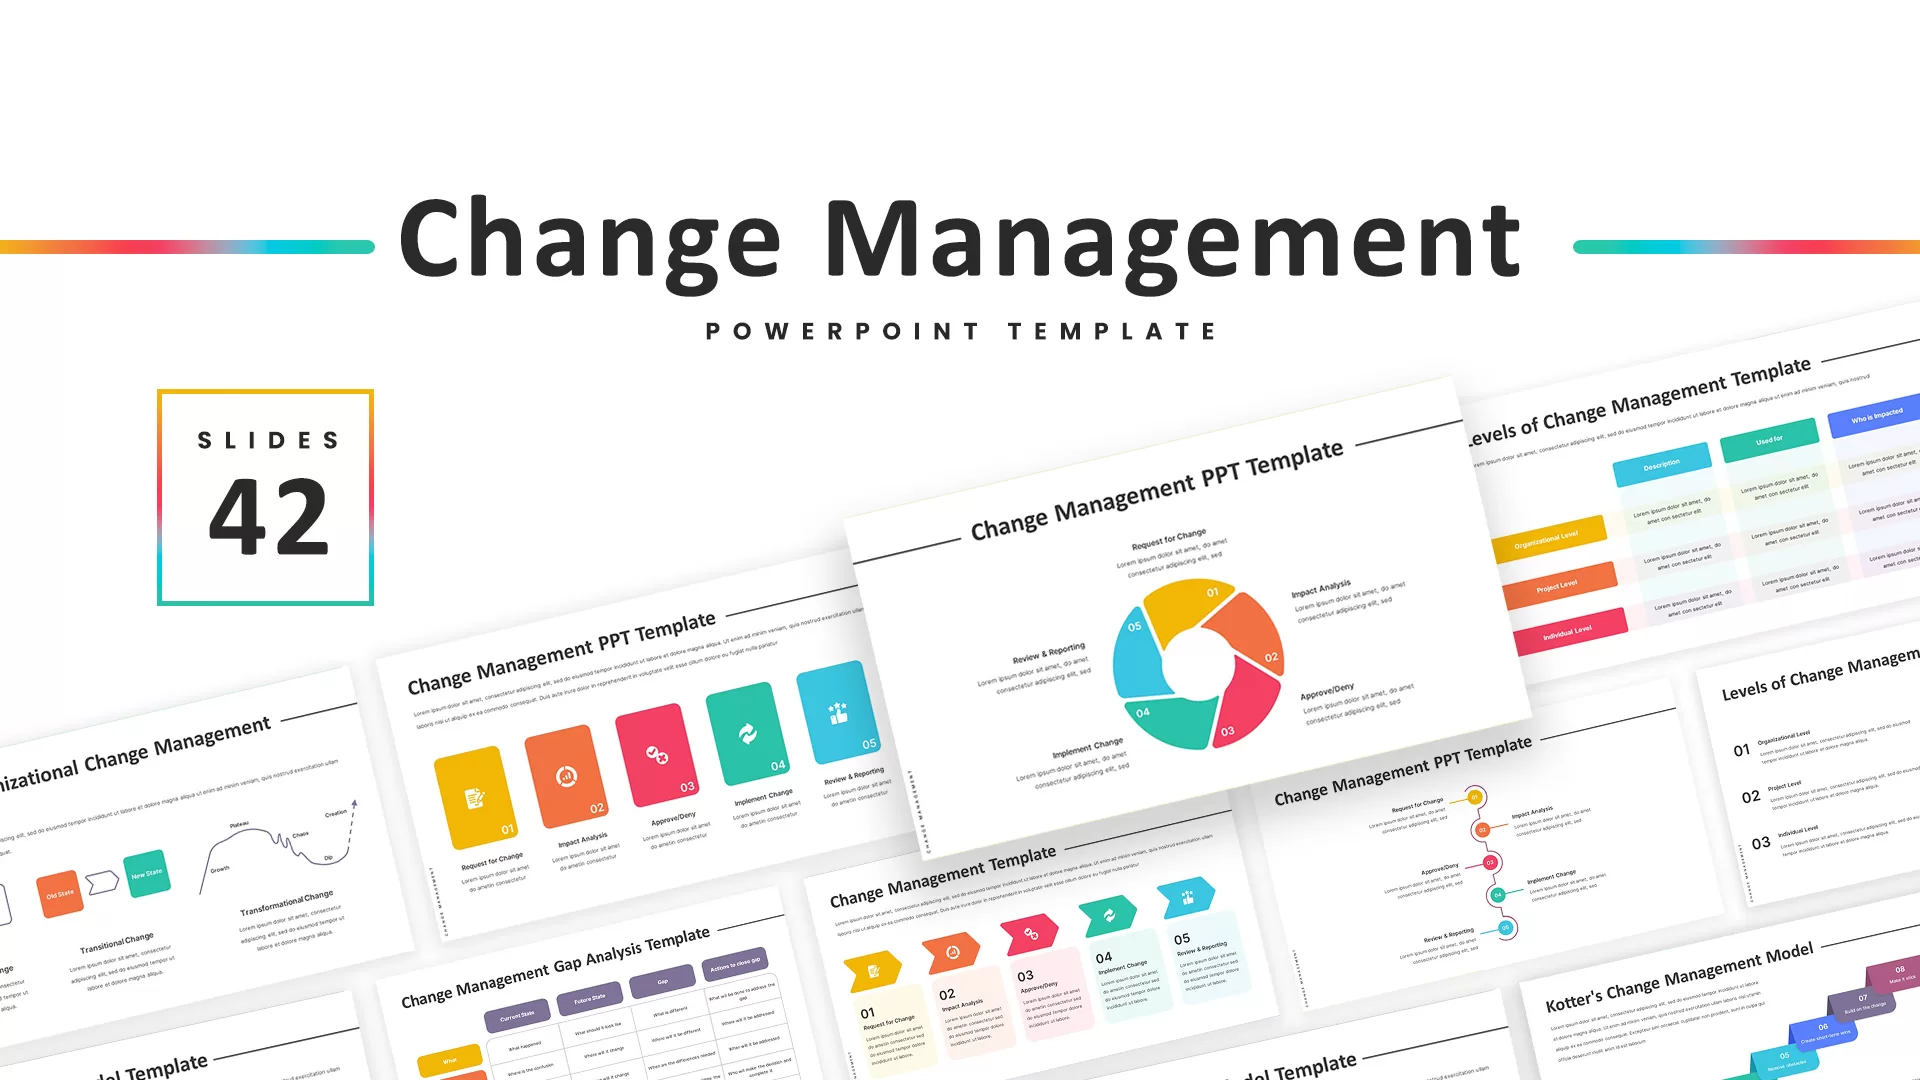 Change Management powerpoint template